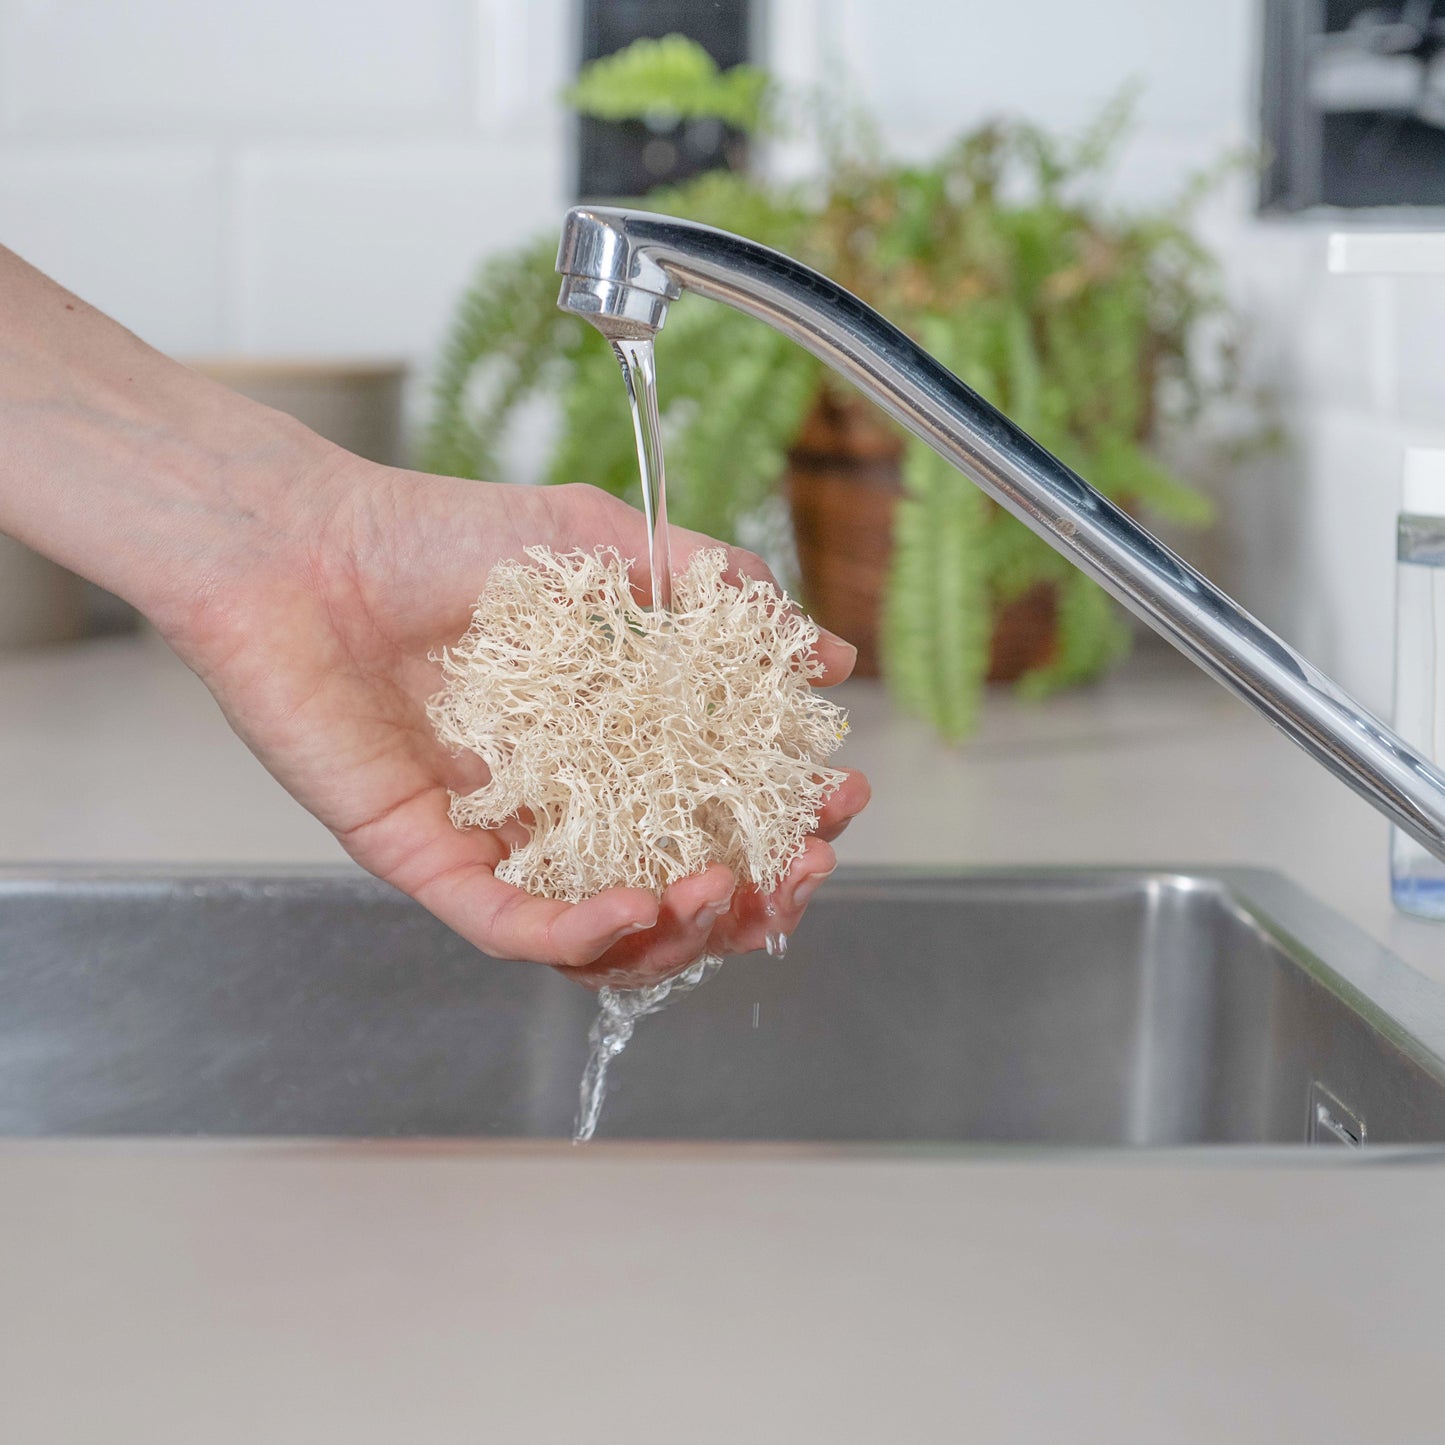 plastic-free loofah kitchen sponge being showed on the tap water